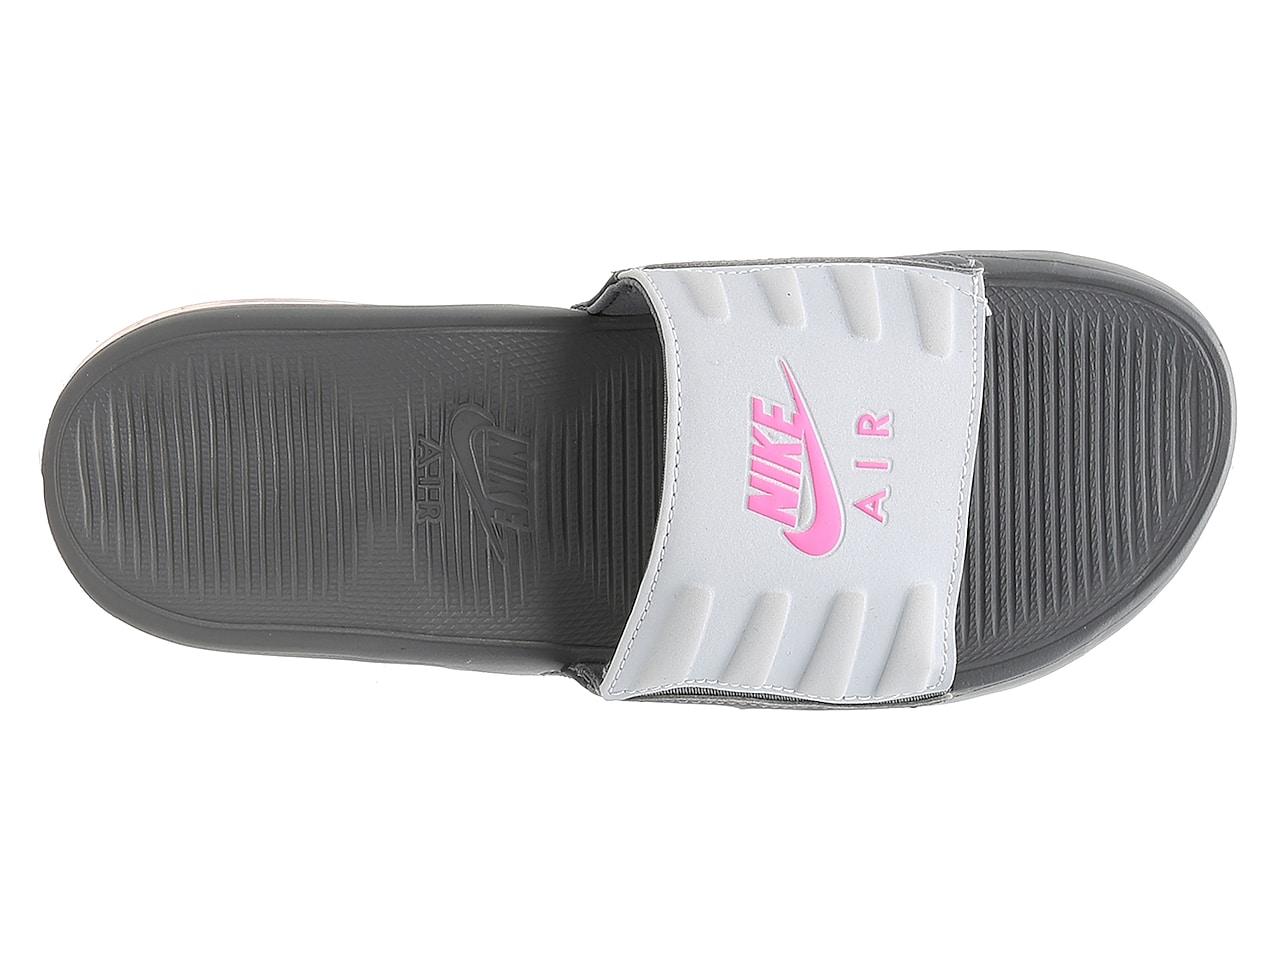 Nike Max Camden Sandals in Grey/Pink (Gray)